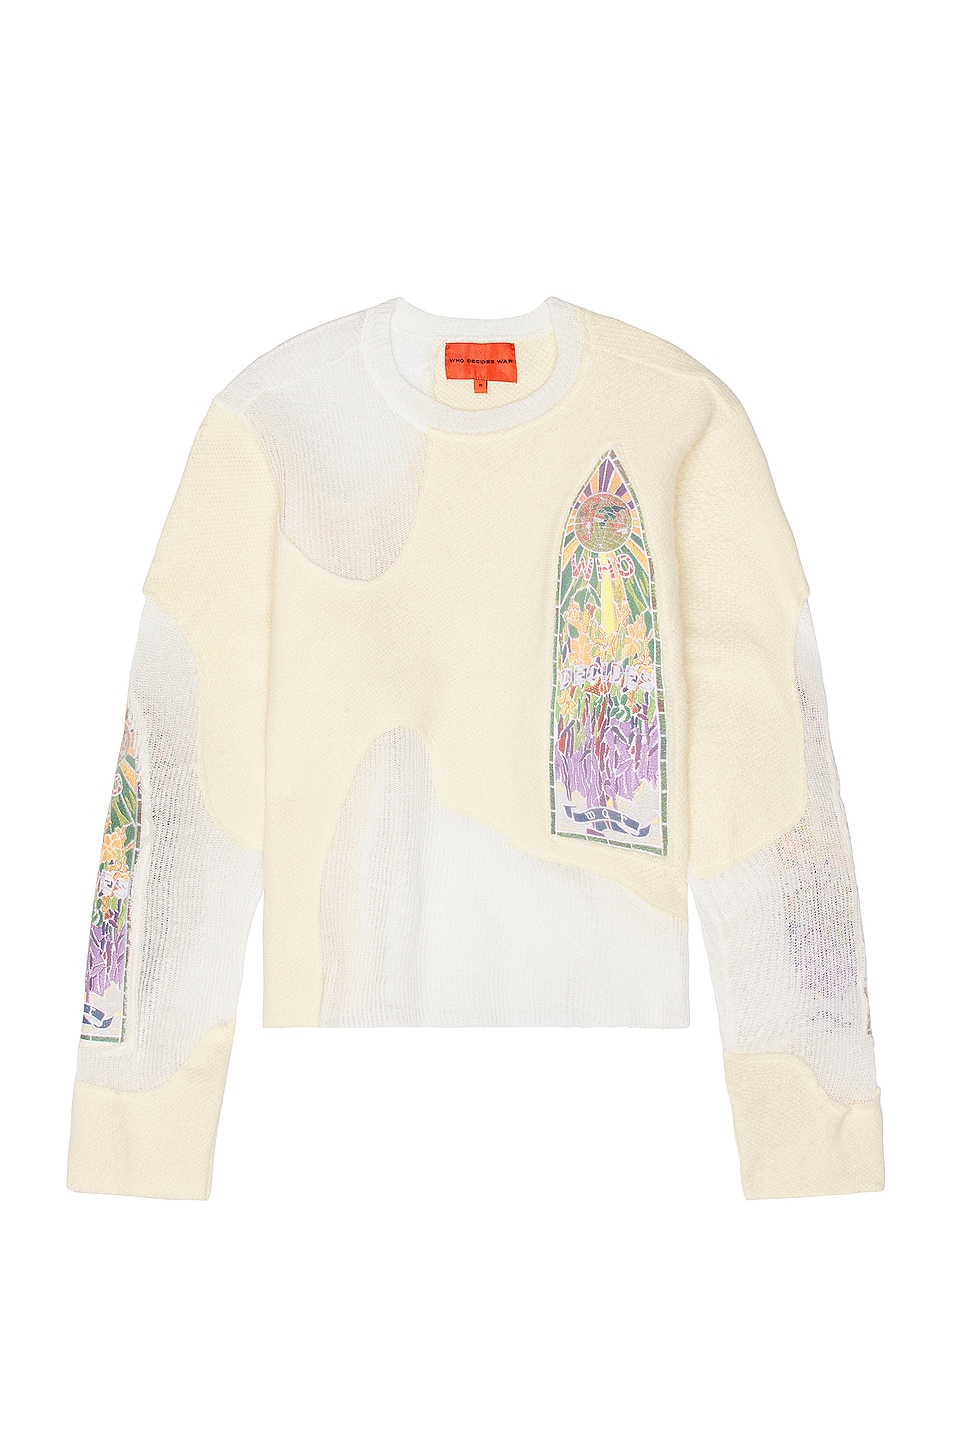 Image 1 of Who Decides War by Ev Bravado Veiled Collegiate Sweater in Cloud